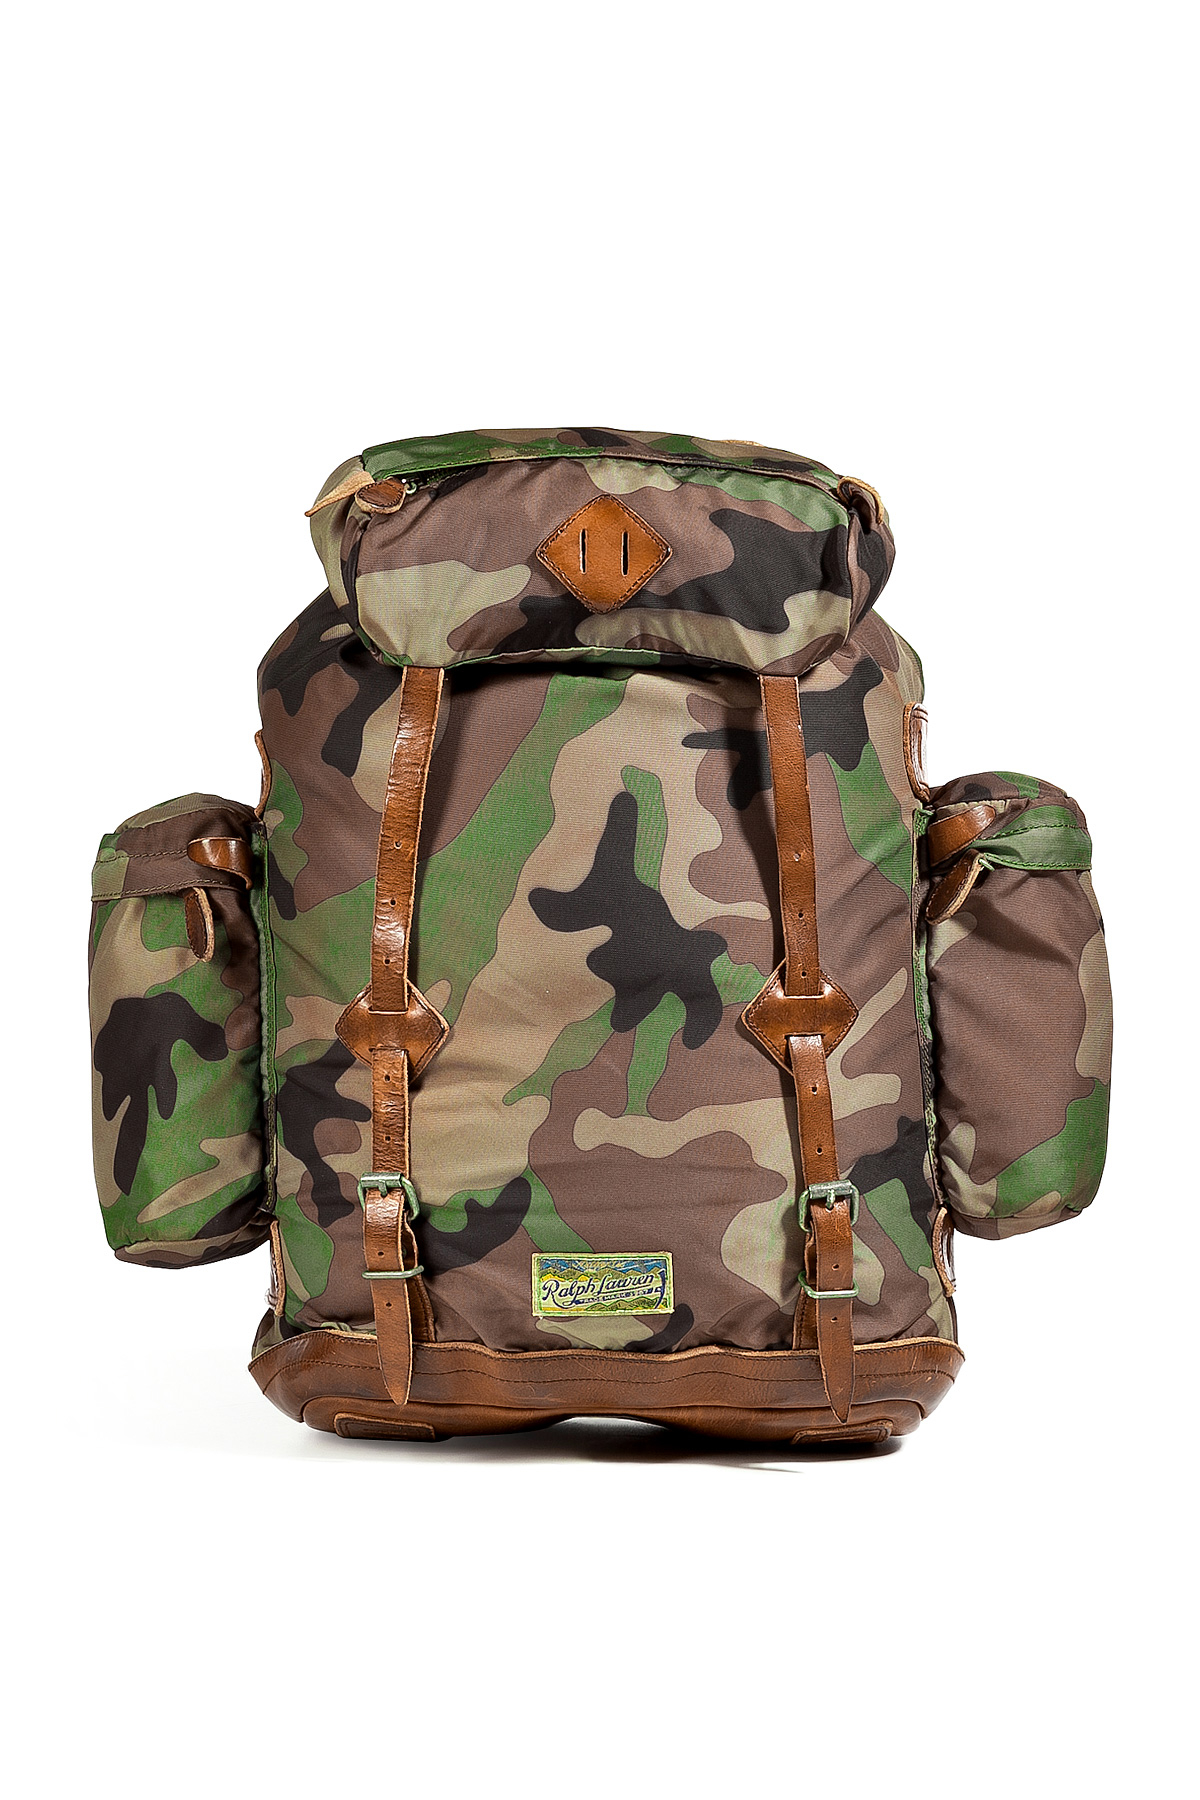 Lyst - Polo Ralph Lauren Camo Print Backpack With Leather Trim in Green for Men